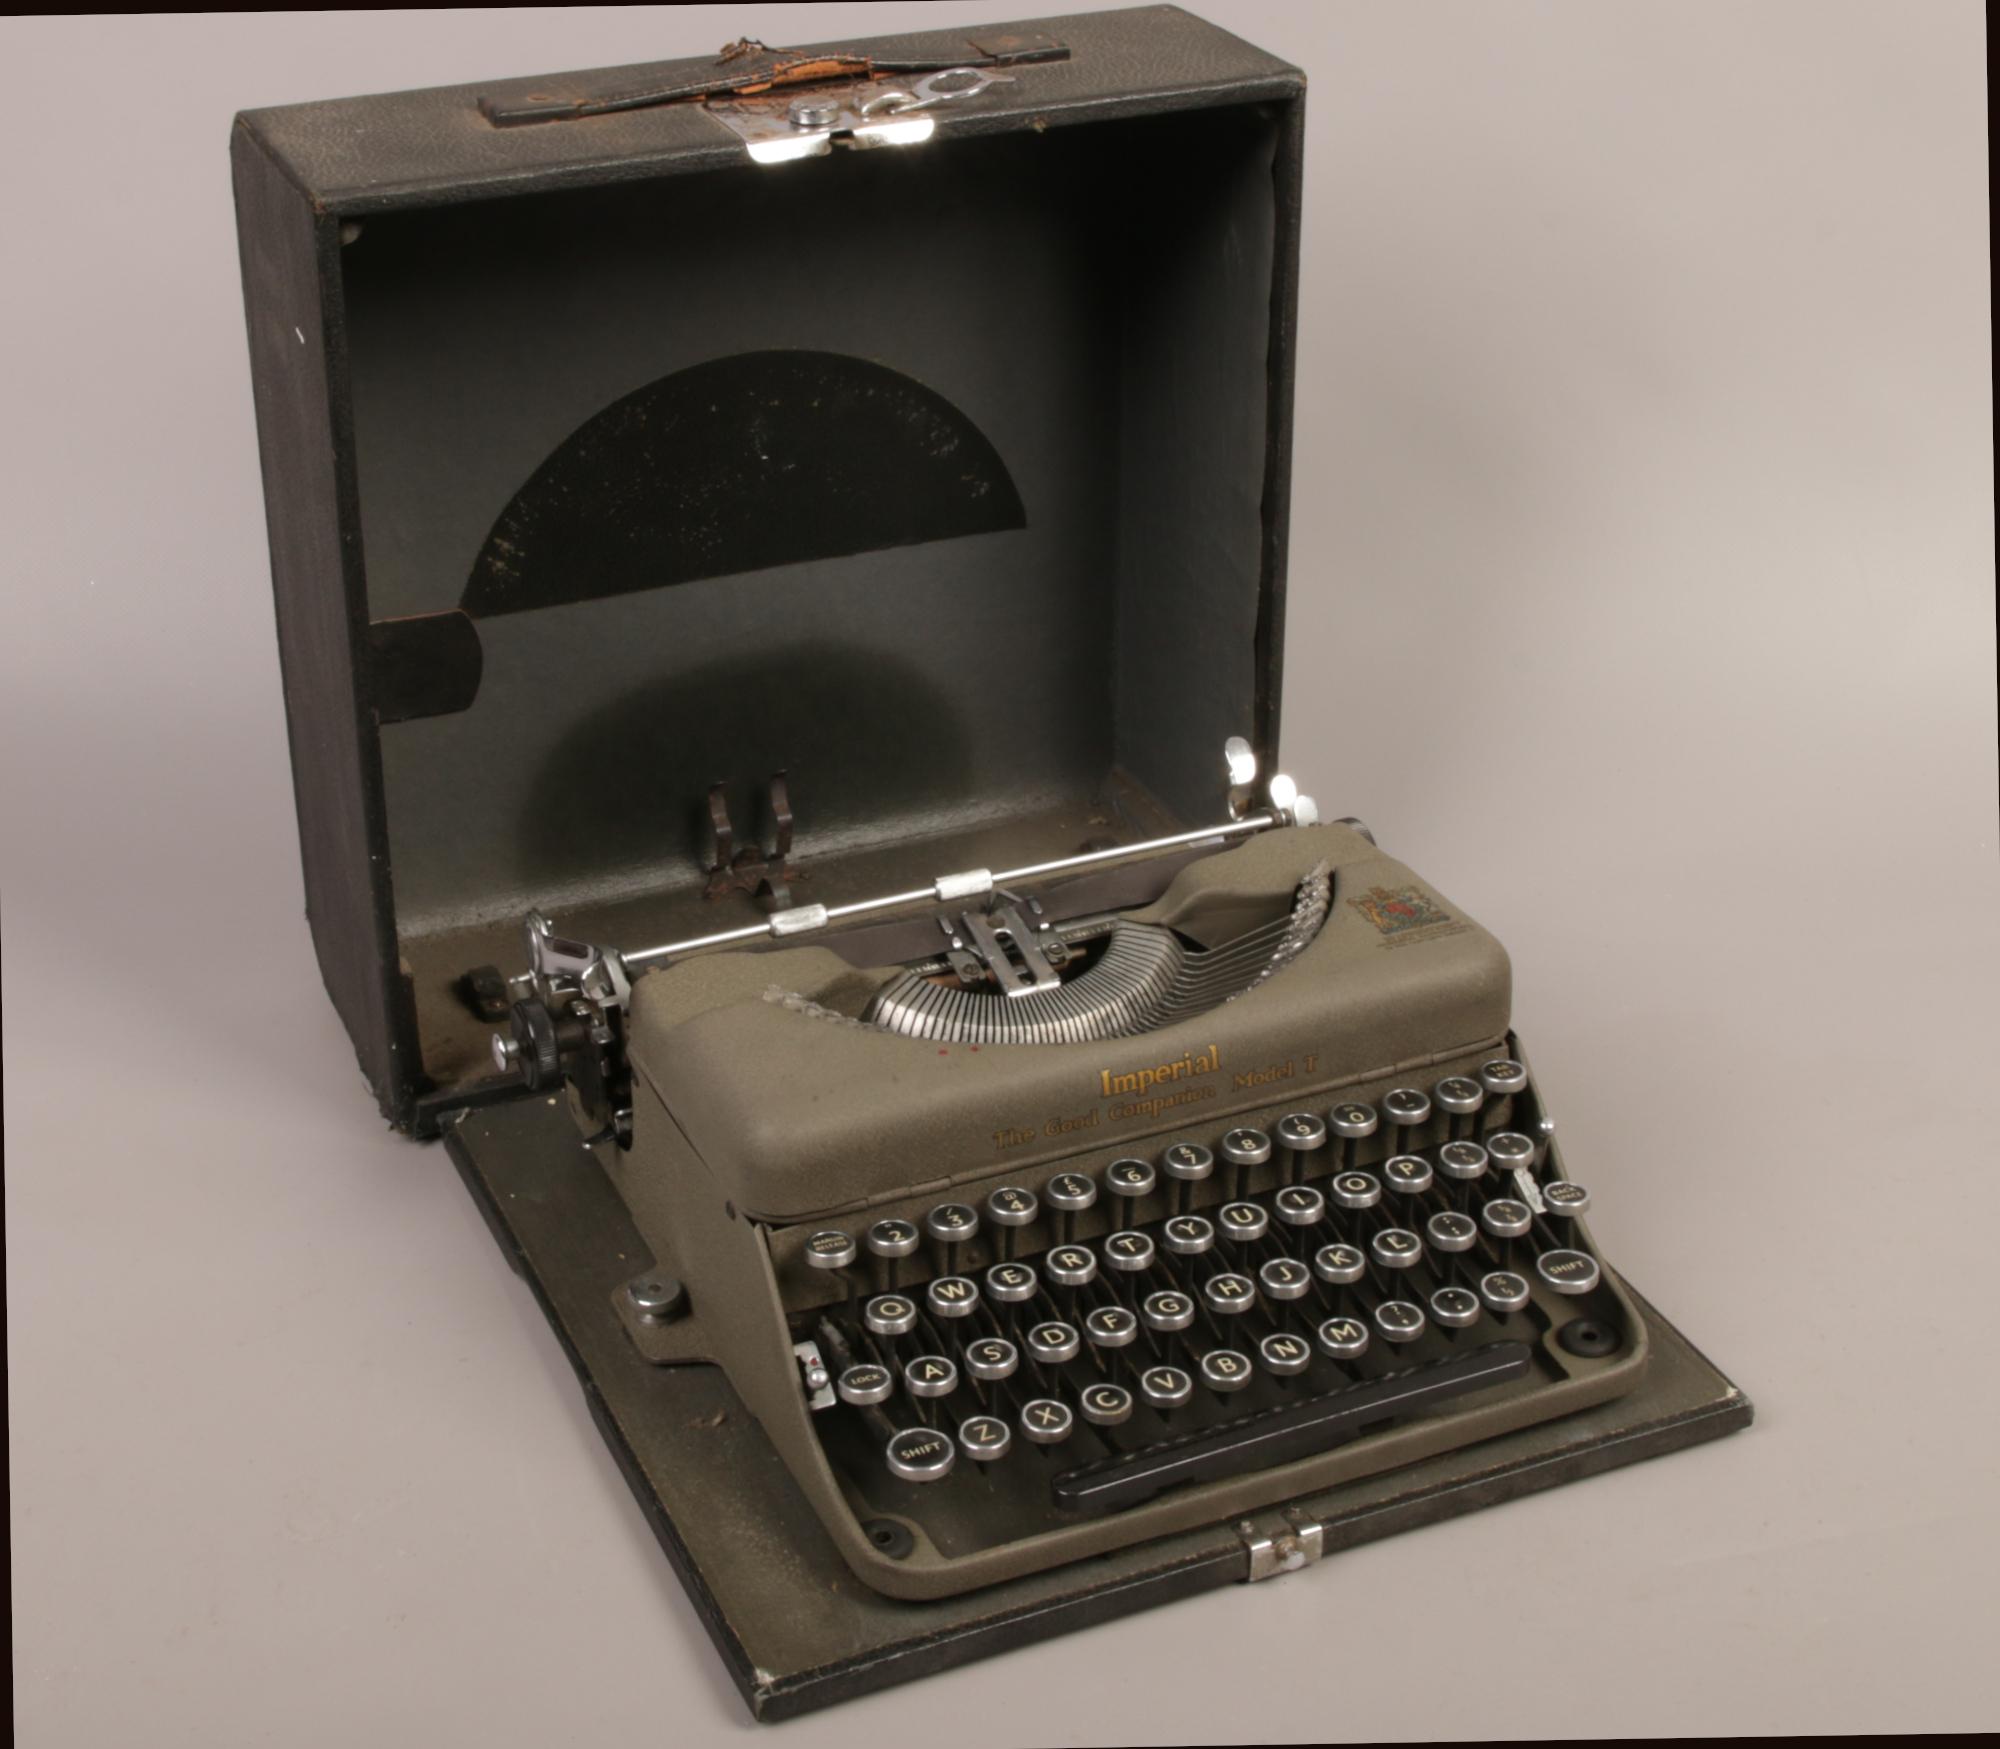 A cased Imperial typewriter.